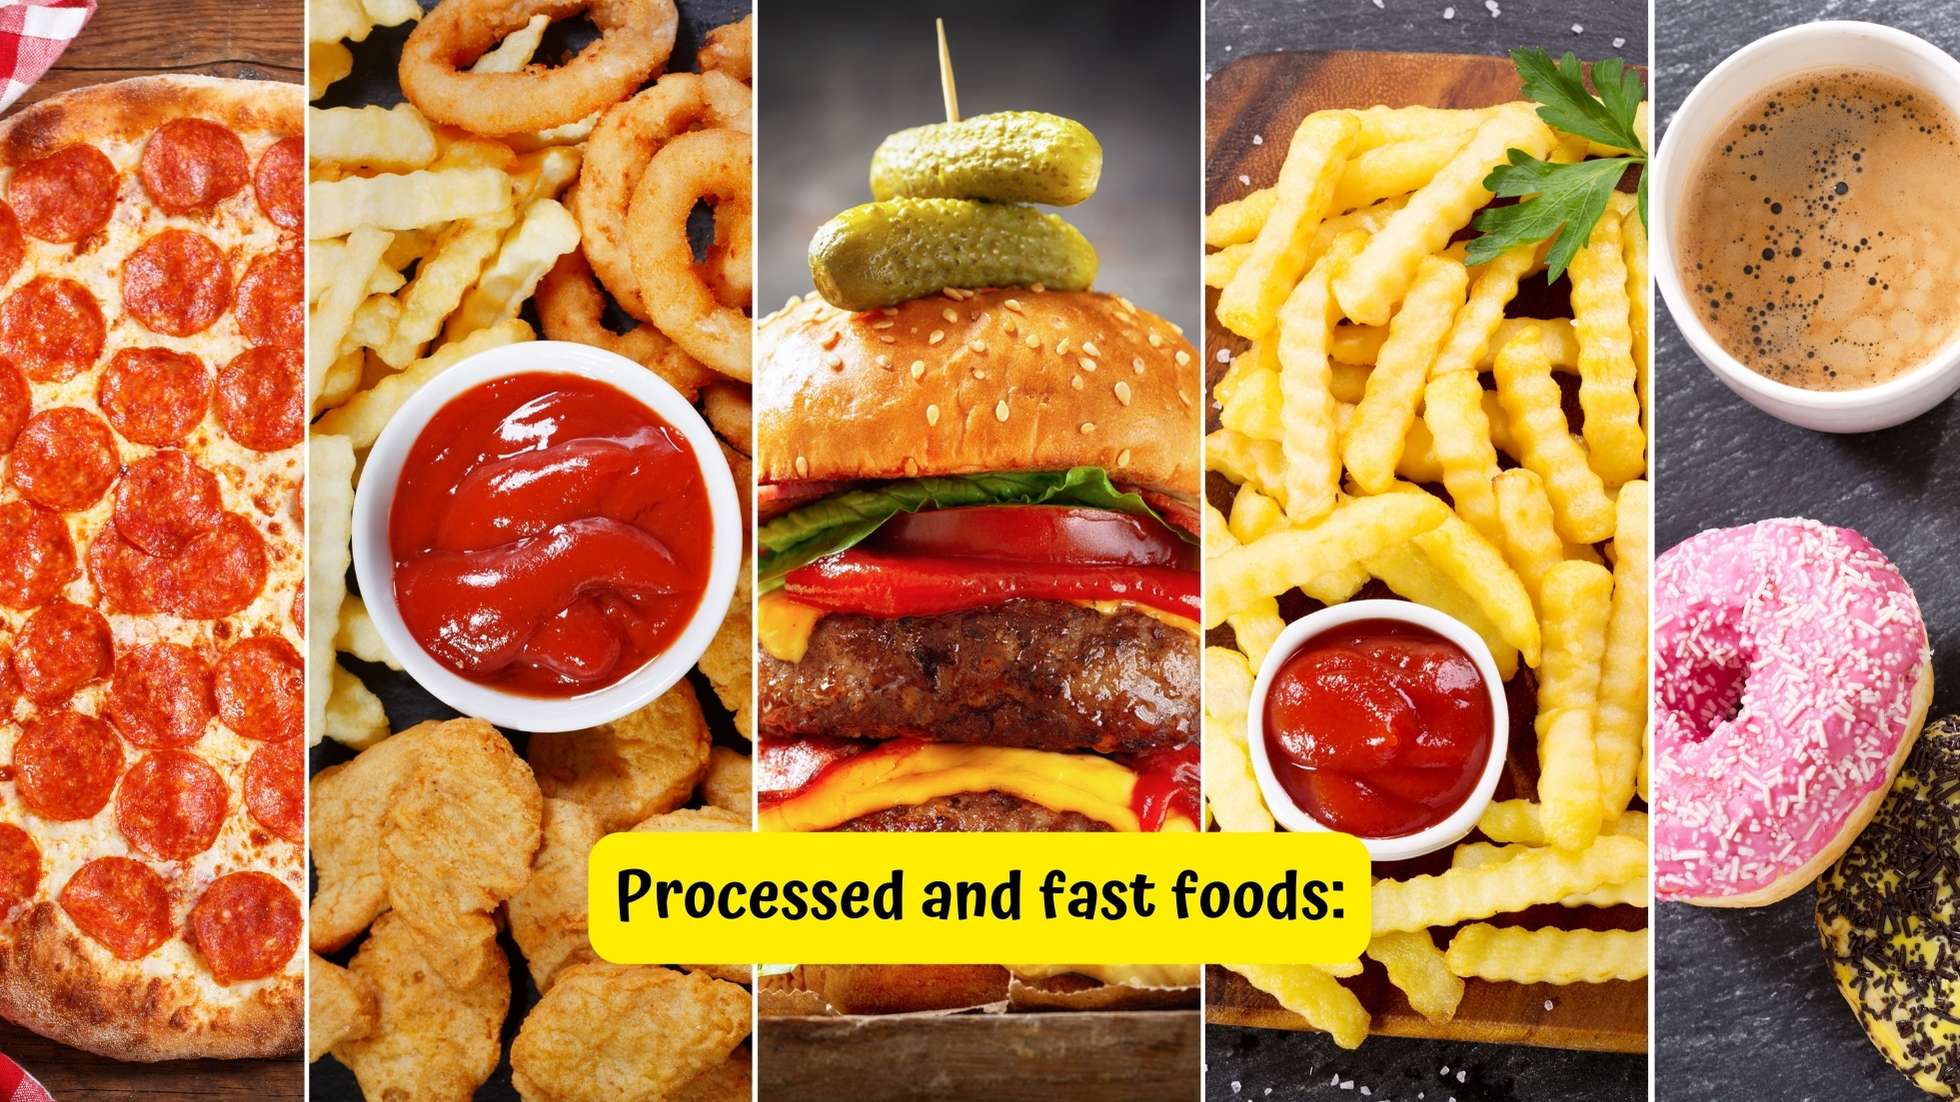 Processed and fast foods: